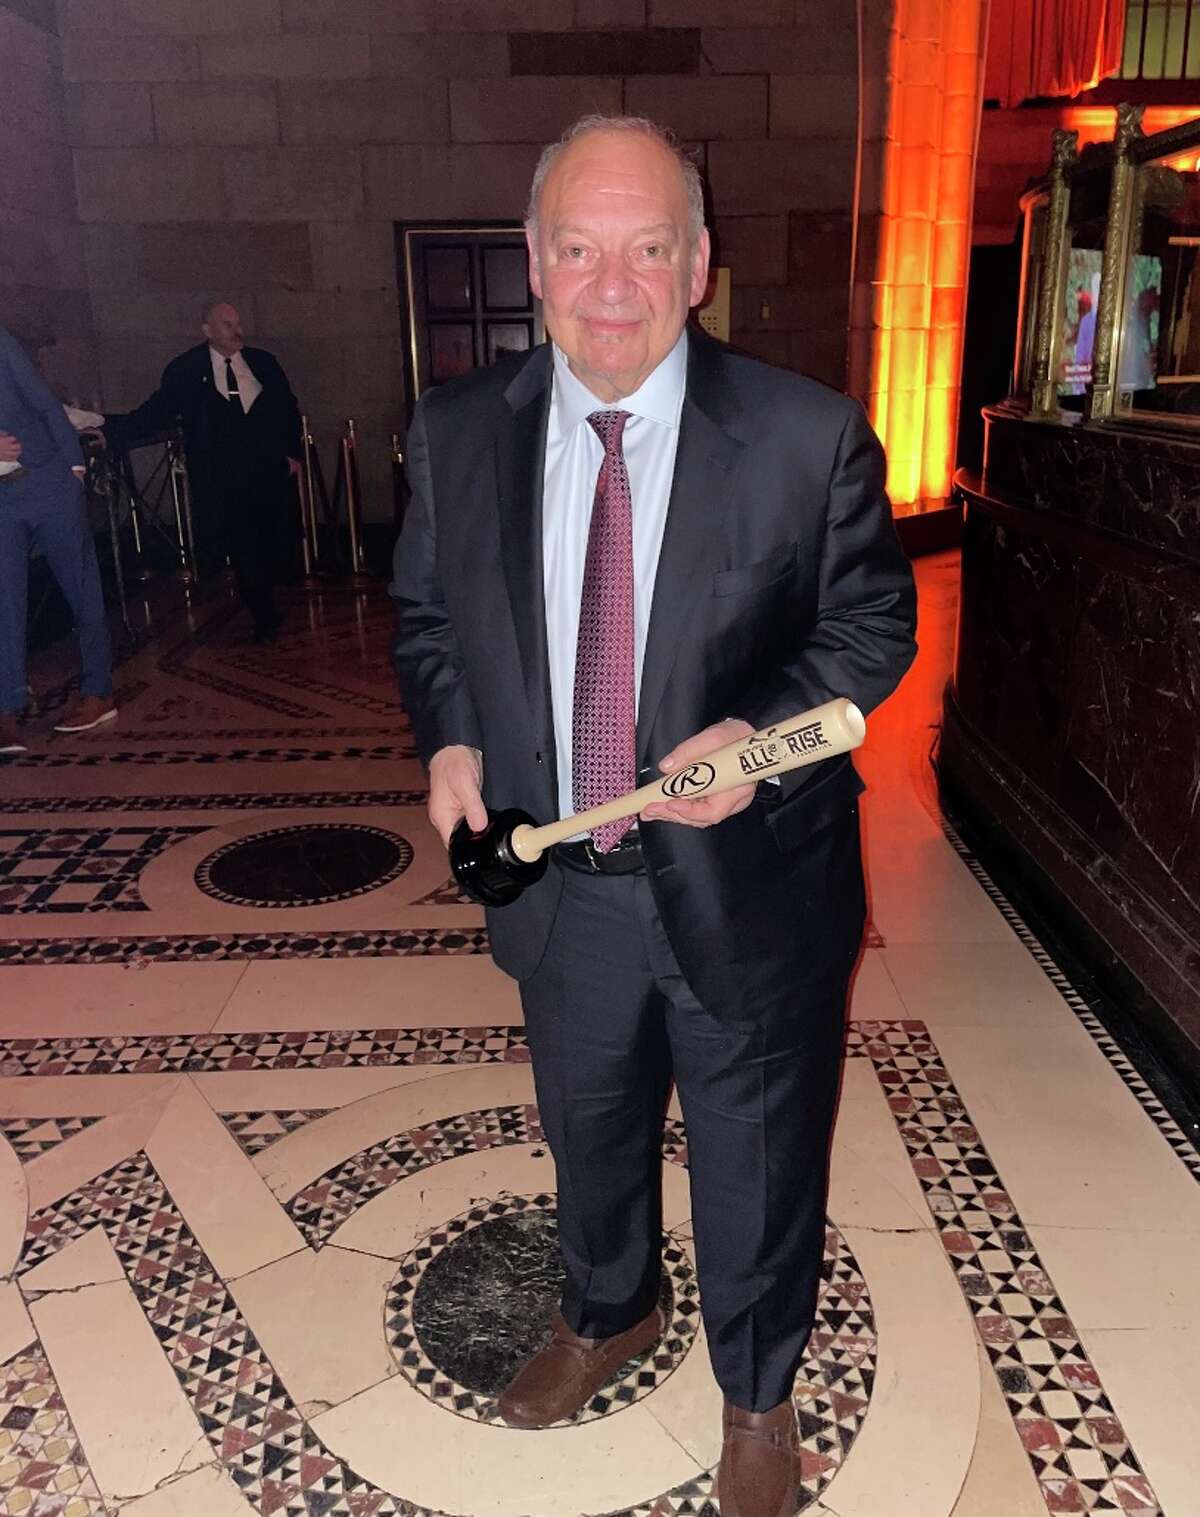 Greenwich resident John J. Filippelli, president of the YES Network, after receiving the “Slugger Award” at Aaron Judge’s ALL RISE Foundation Gala at Cipriani on Nov. 18.  